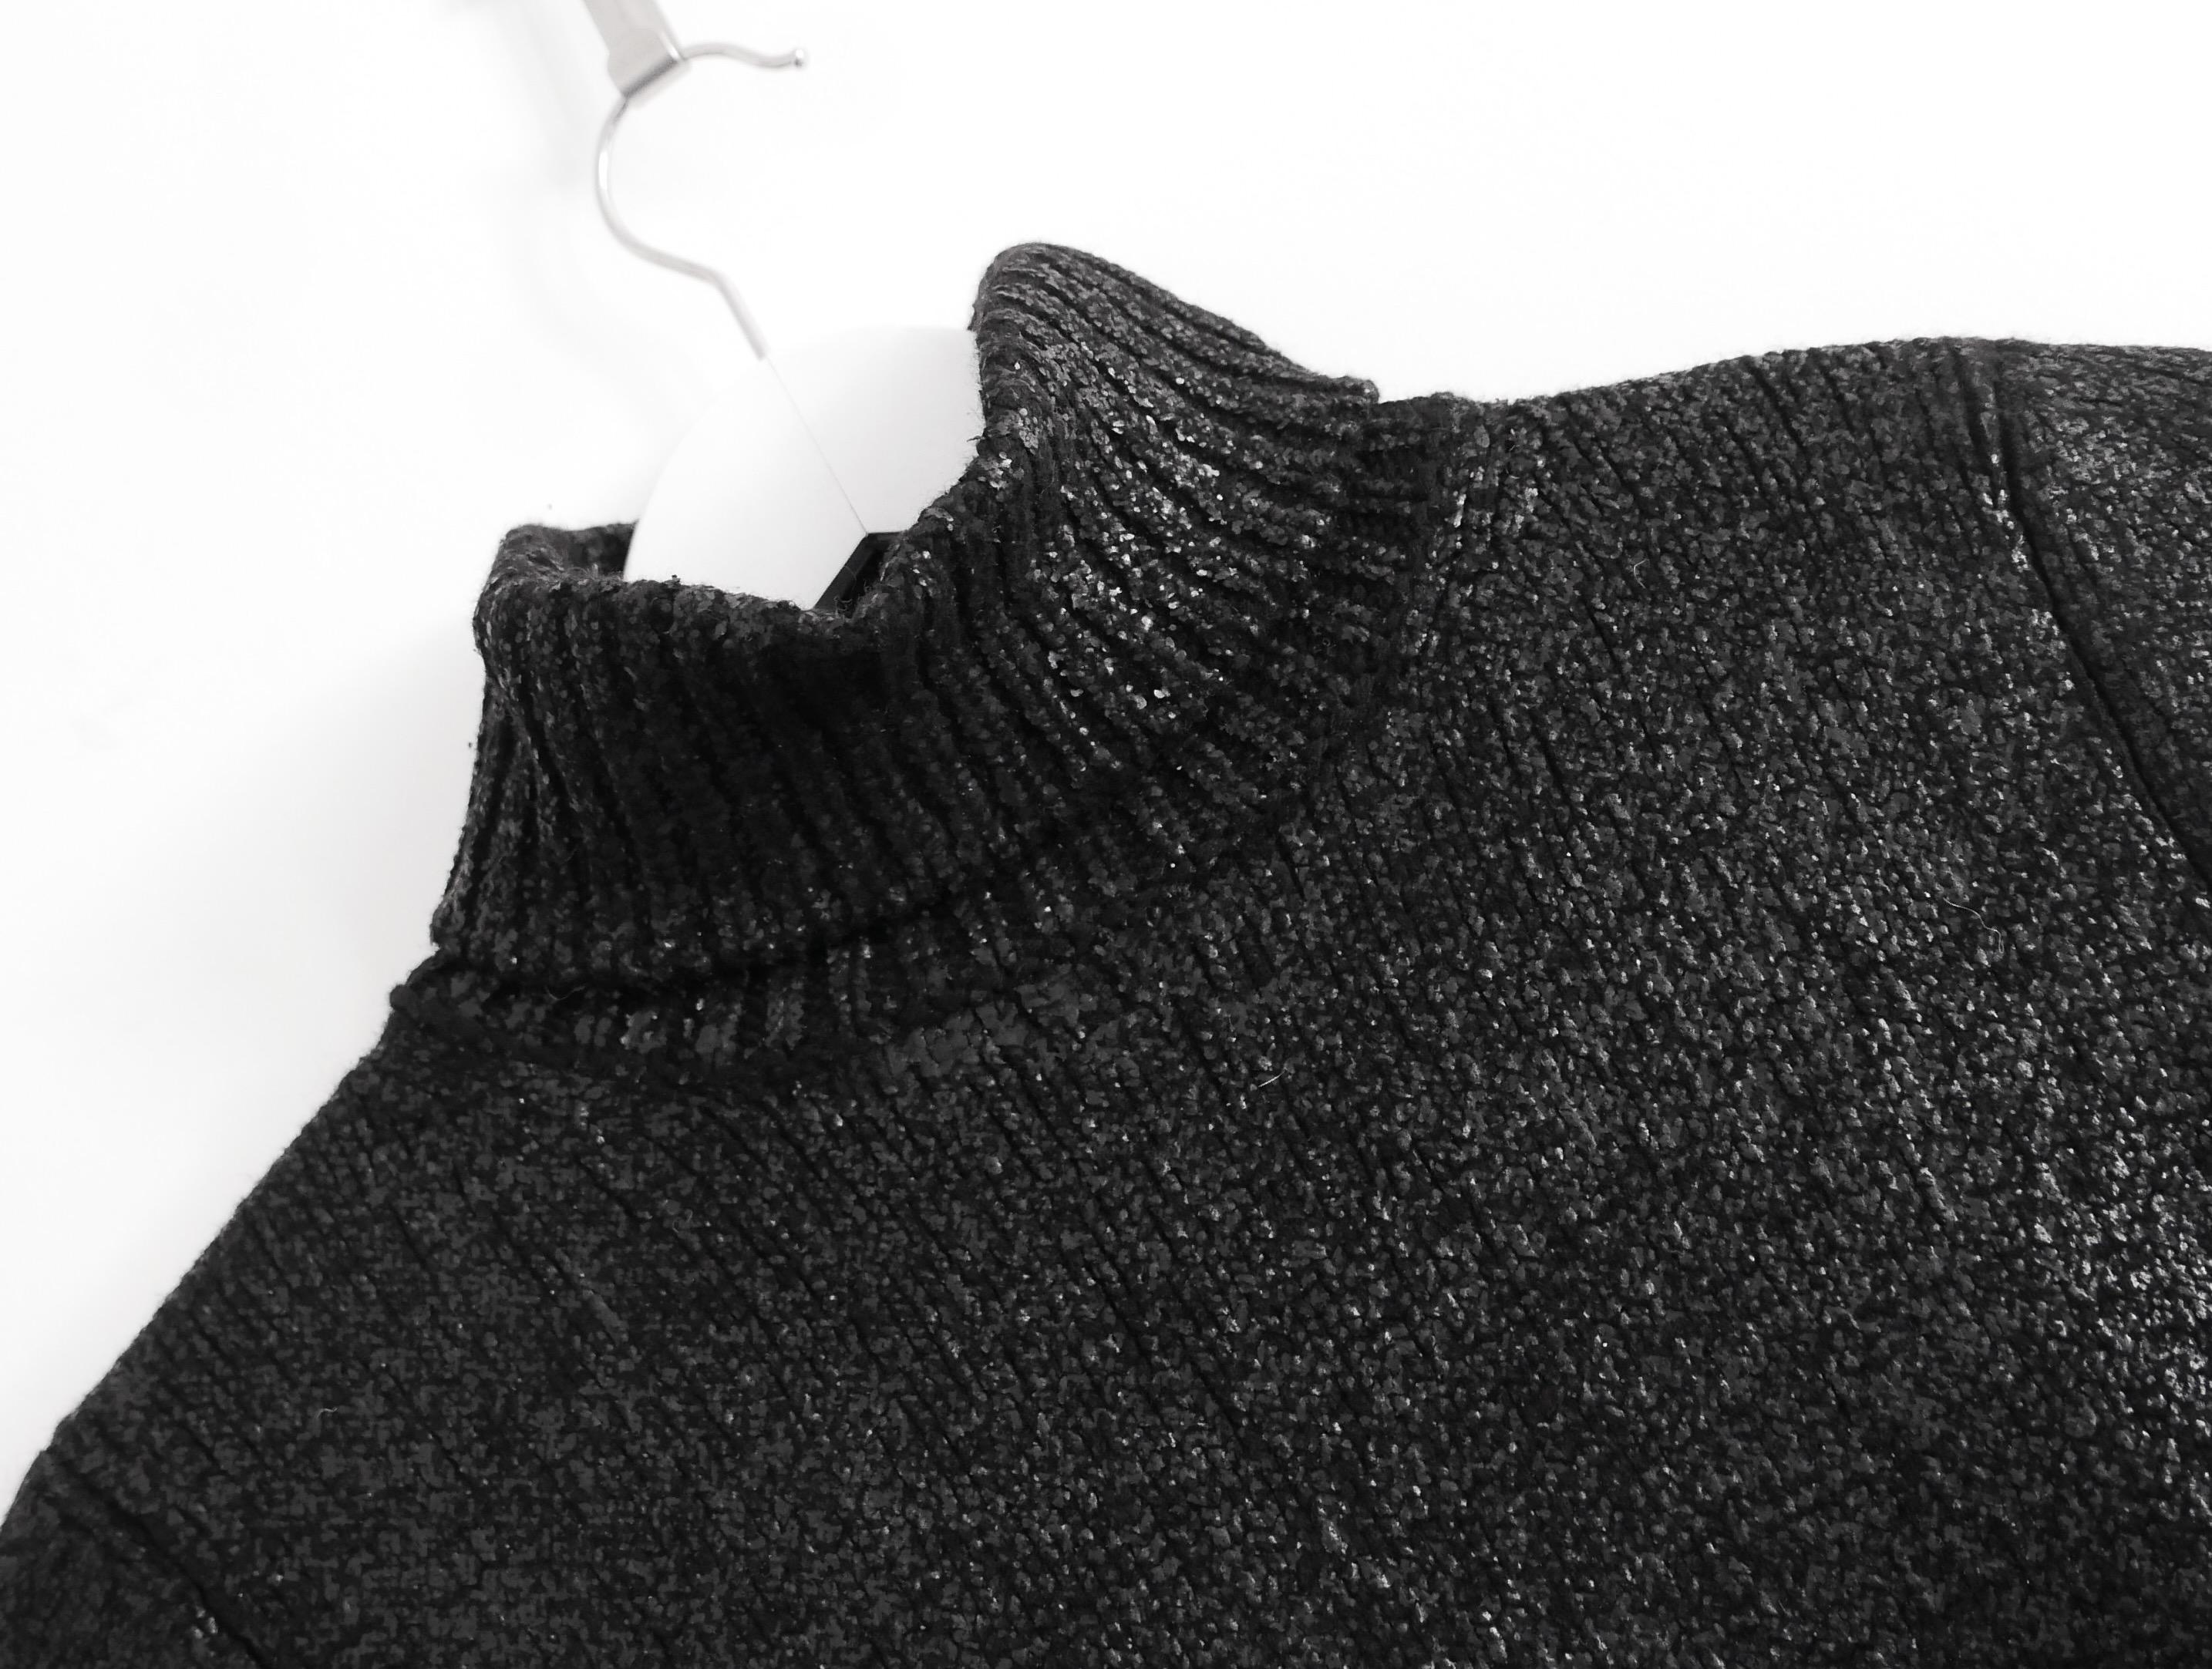 Fabulous archival Celine cashmere mix jumper - from pre Philo times when Michael Kors was at the label. Worn once. Made from soft black cashmere and wool with a glossy painted metallic finish. It has a ribbed turtleneck, curved hem and a slim cut.